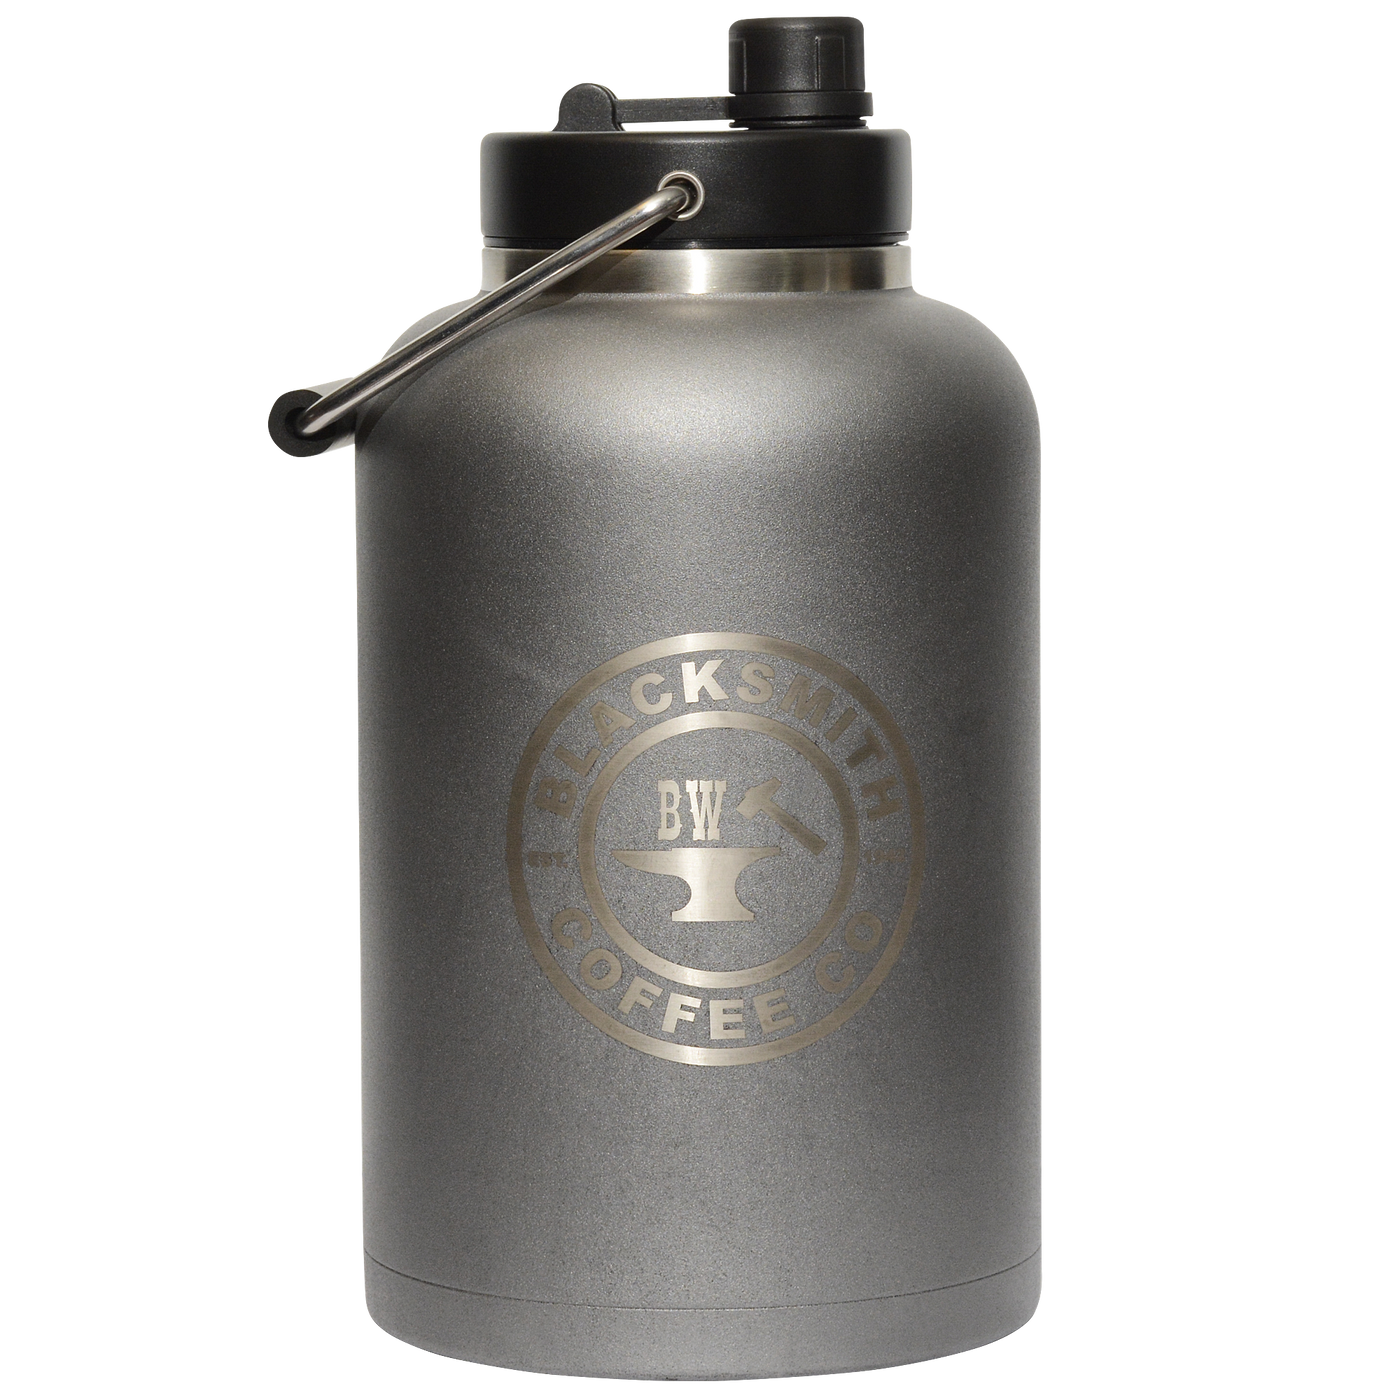 BW (Laser-Etched) 1 gal. Stainless Steel Water Jug